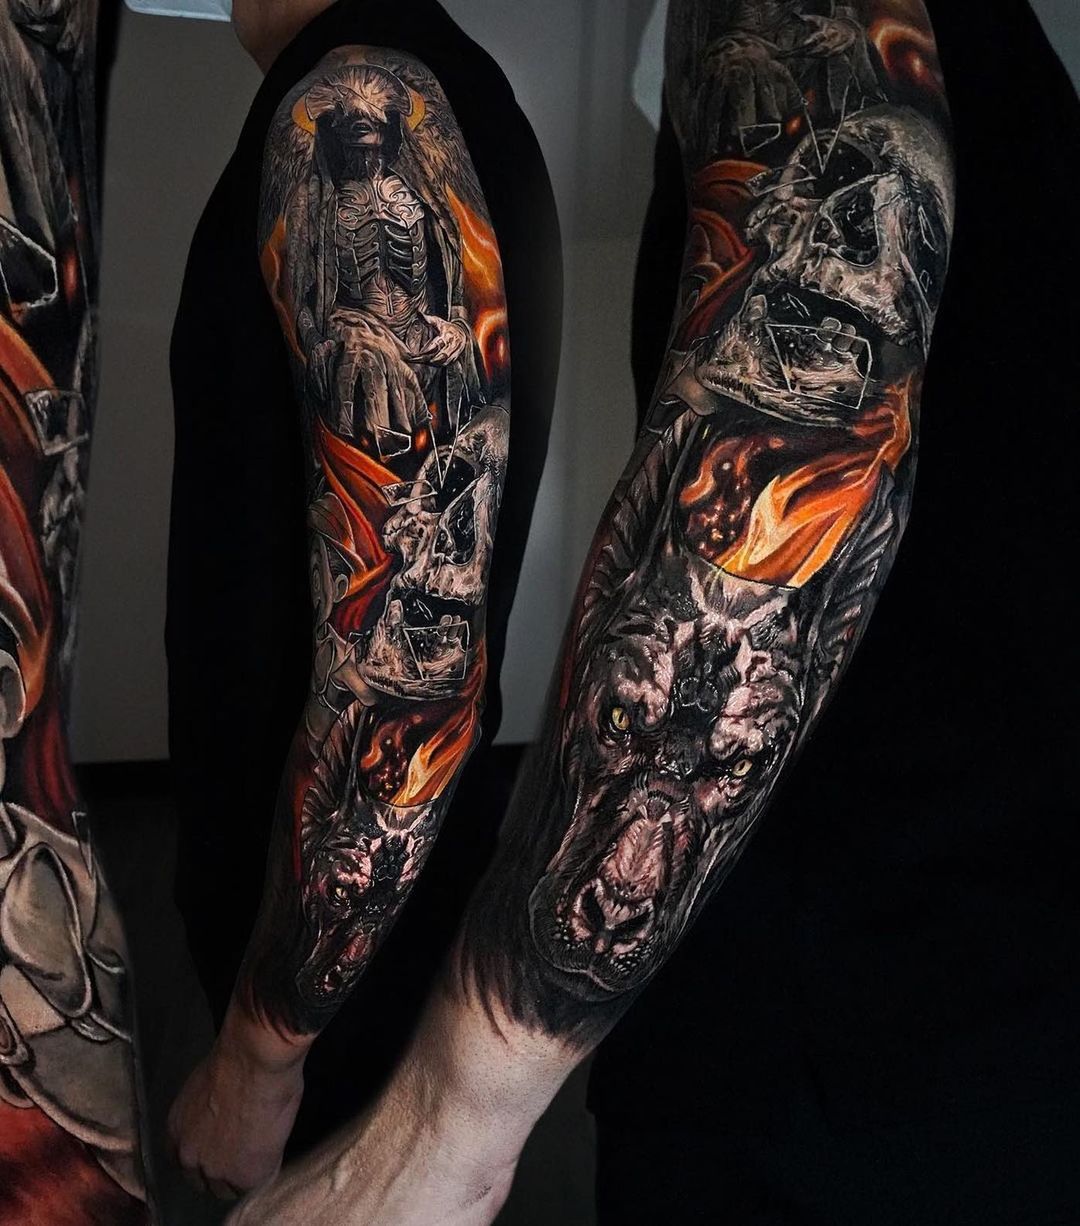 Gallery 3 — The Temple Tattoo